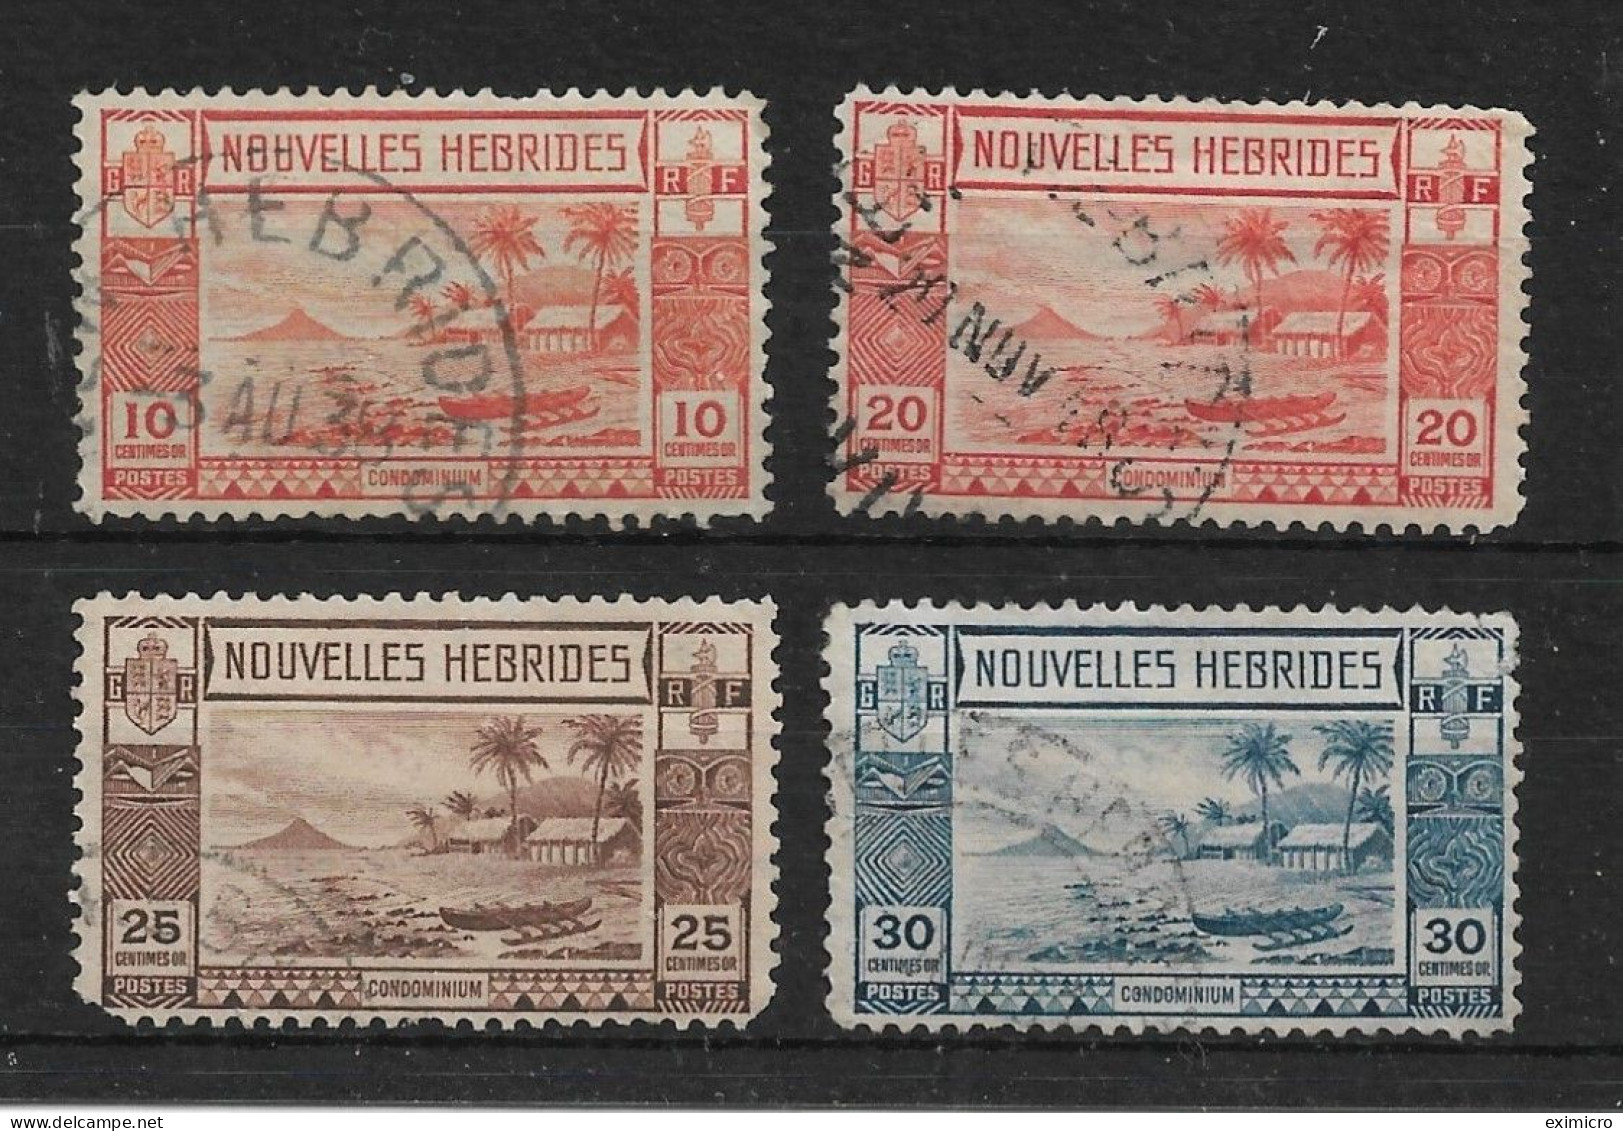 NEW HEBRIDES (FRENCH CURRENCY) 1938 10c, 20c, 25c, 30c SG F54, F56, F57, F58 FINE USED Cat £26 - Usati